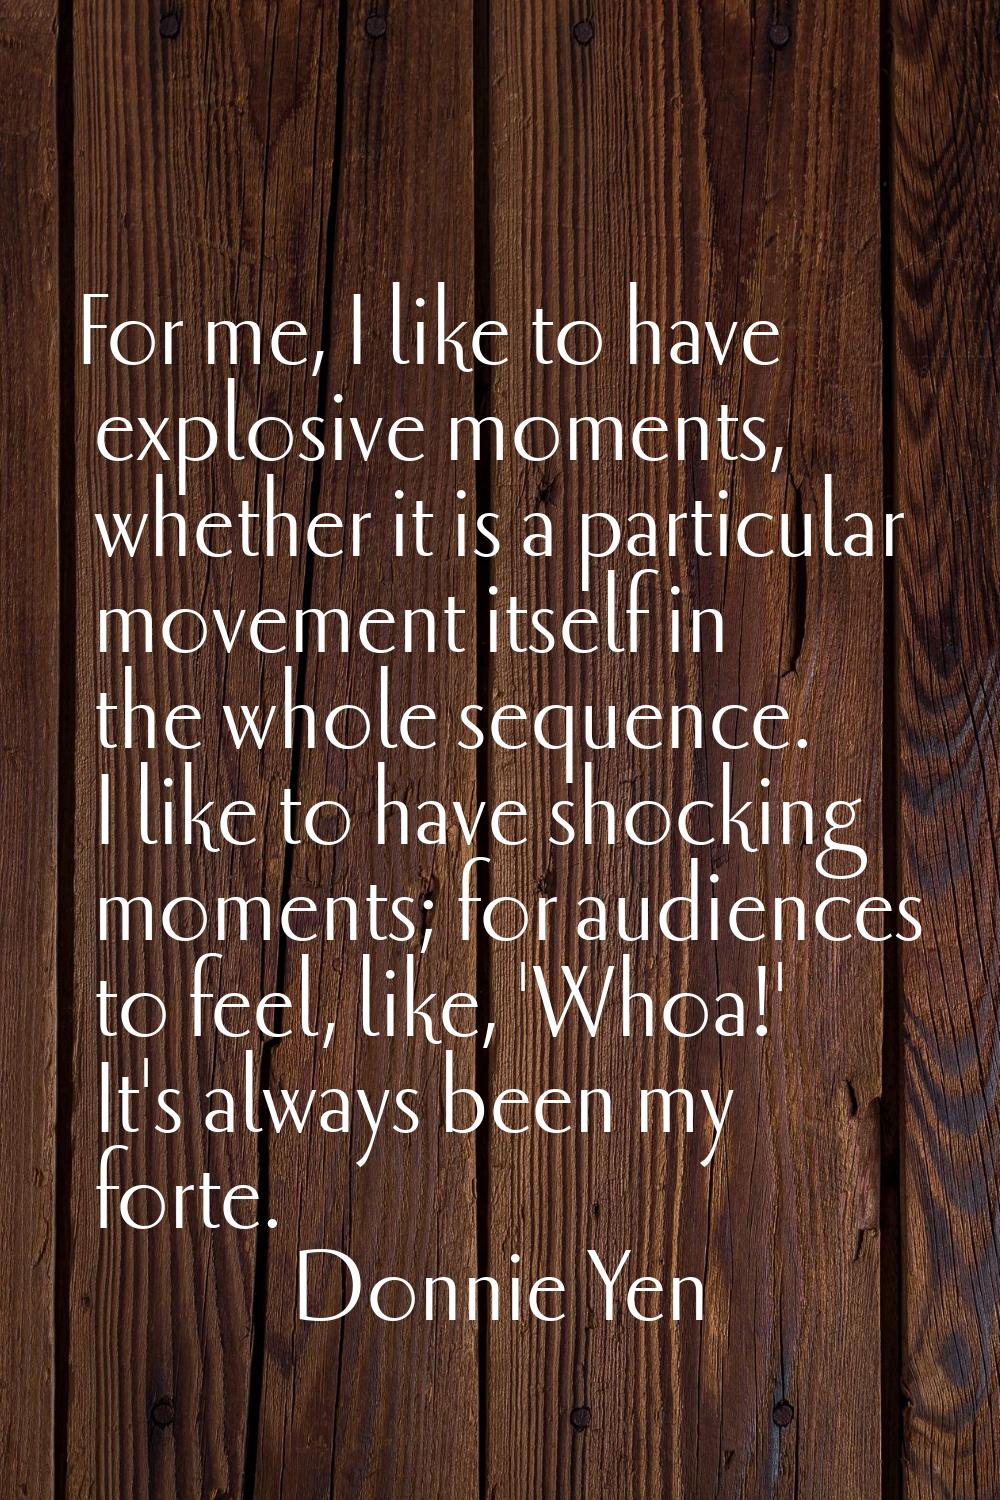 For me, I like to have explosive moments, whether it is a particular movement itself in the whole s